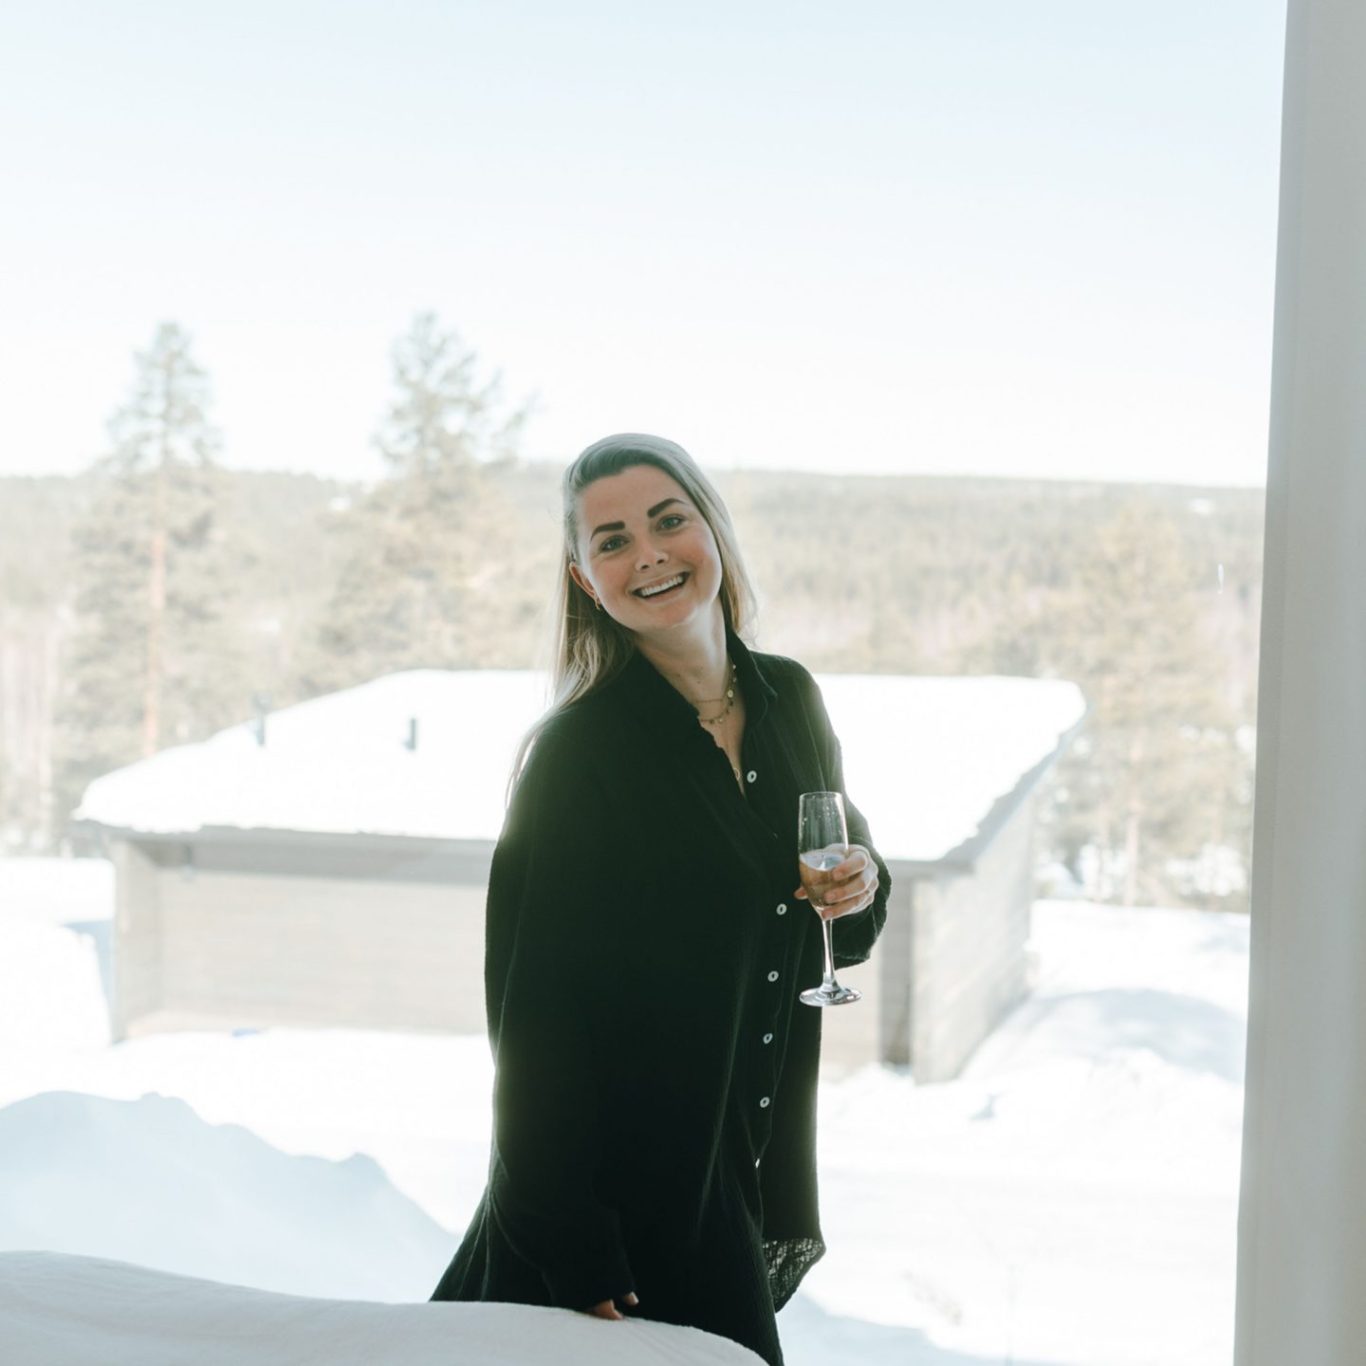 A woman smiling happily at suite in front of a arctic view